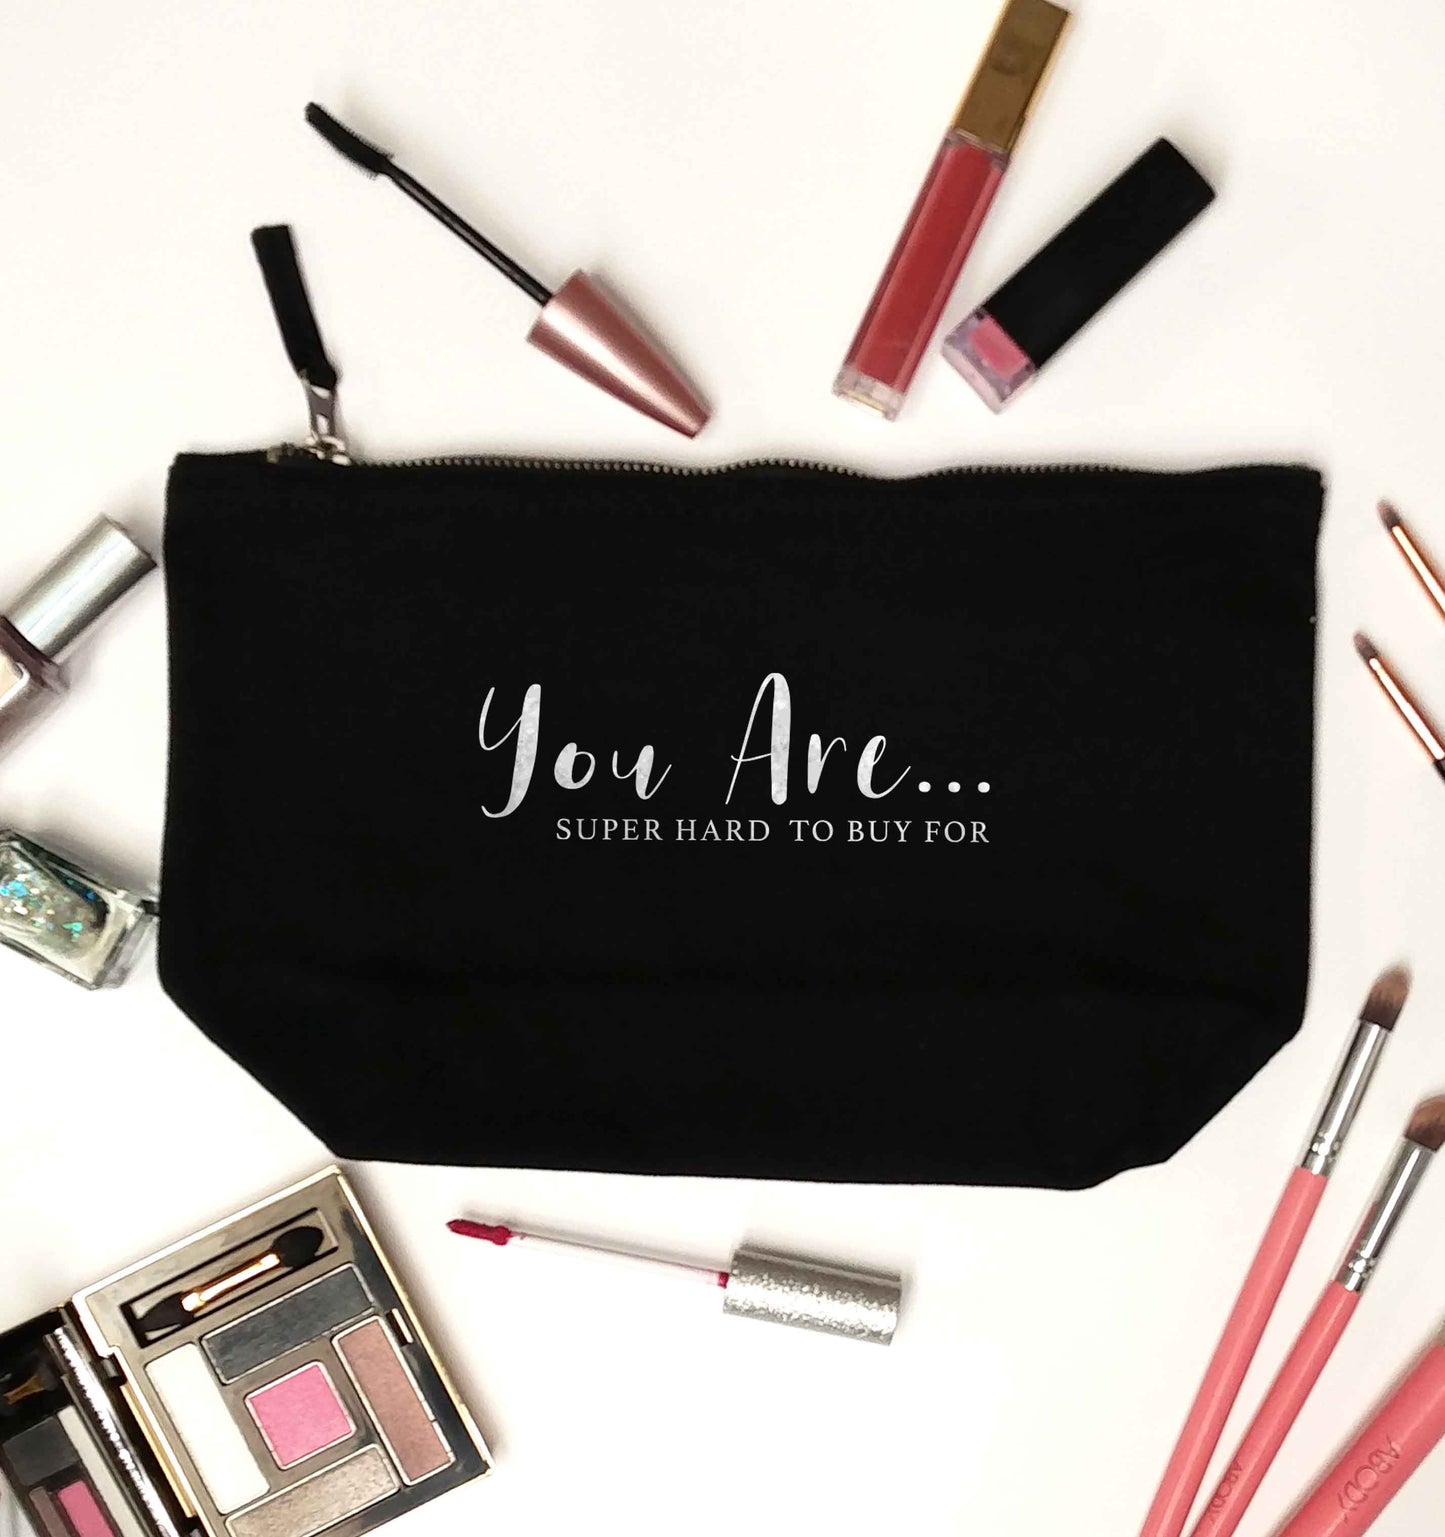 You are super hard to buy for black makeup bag